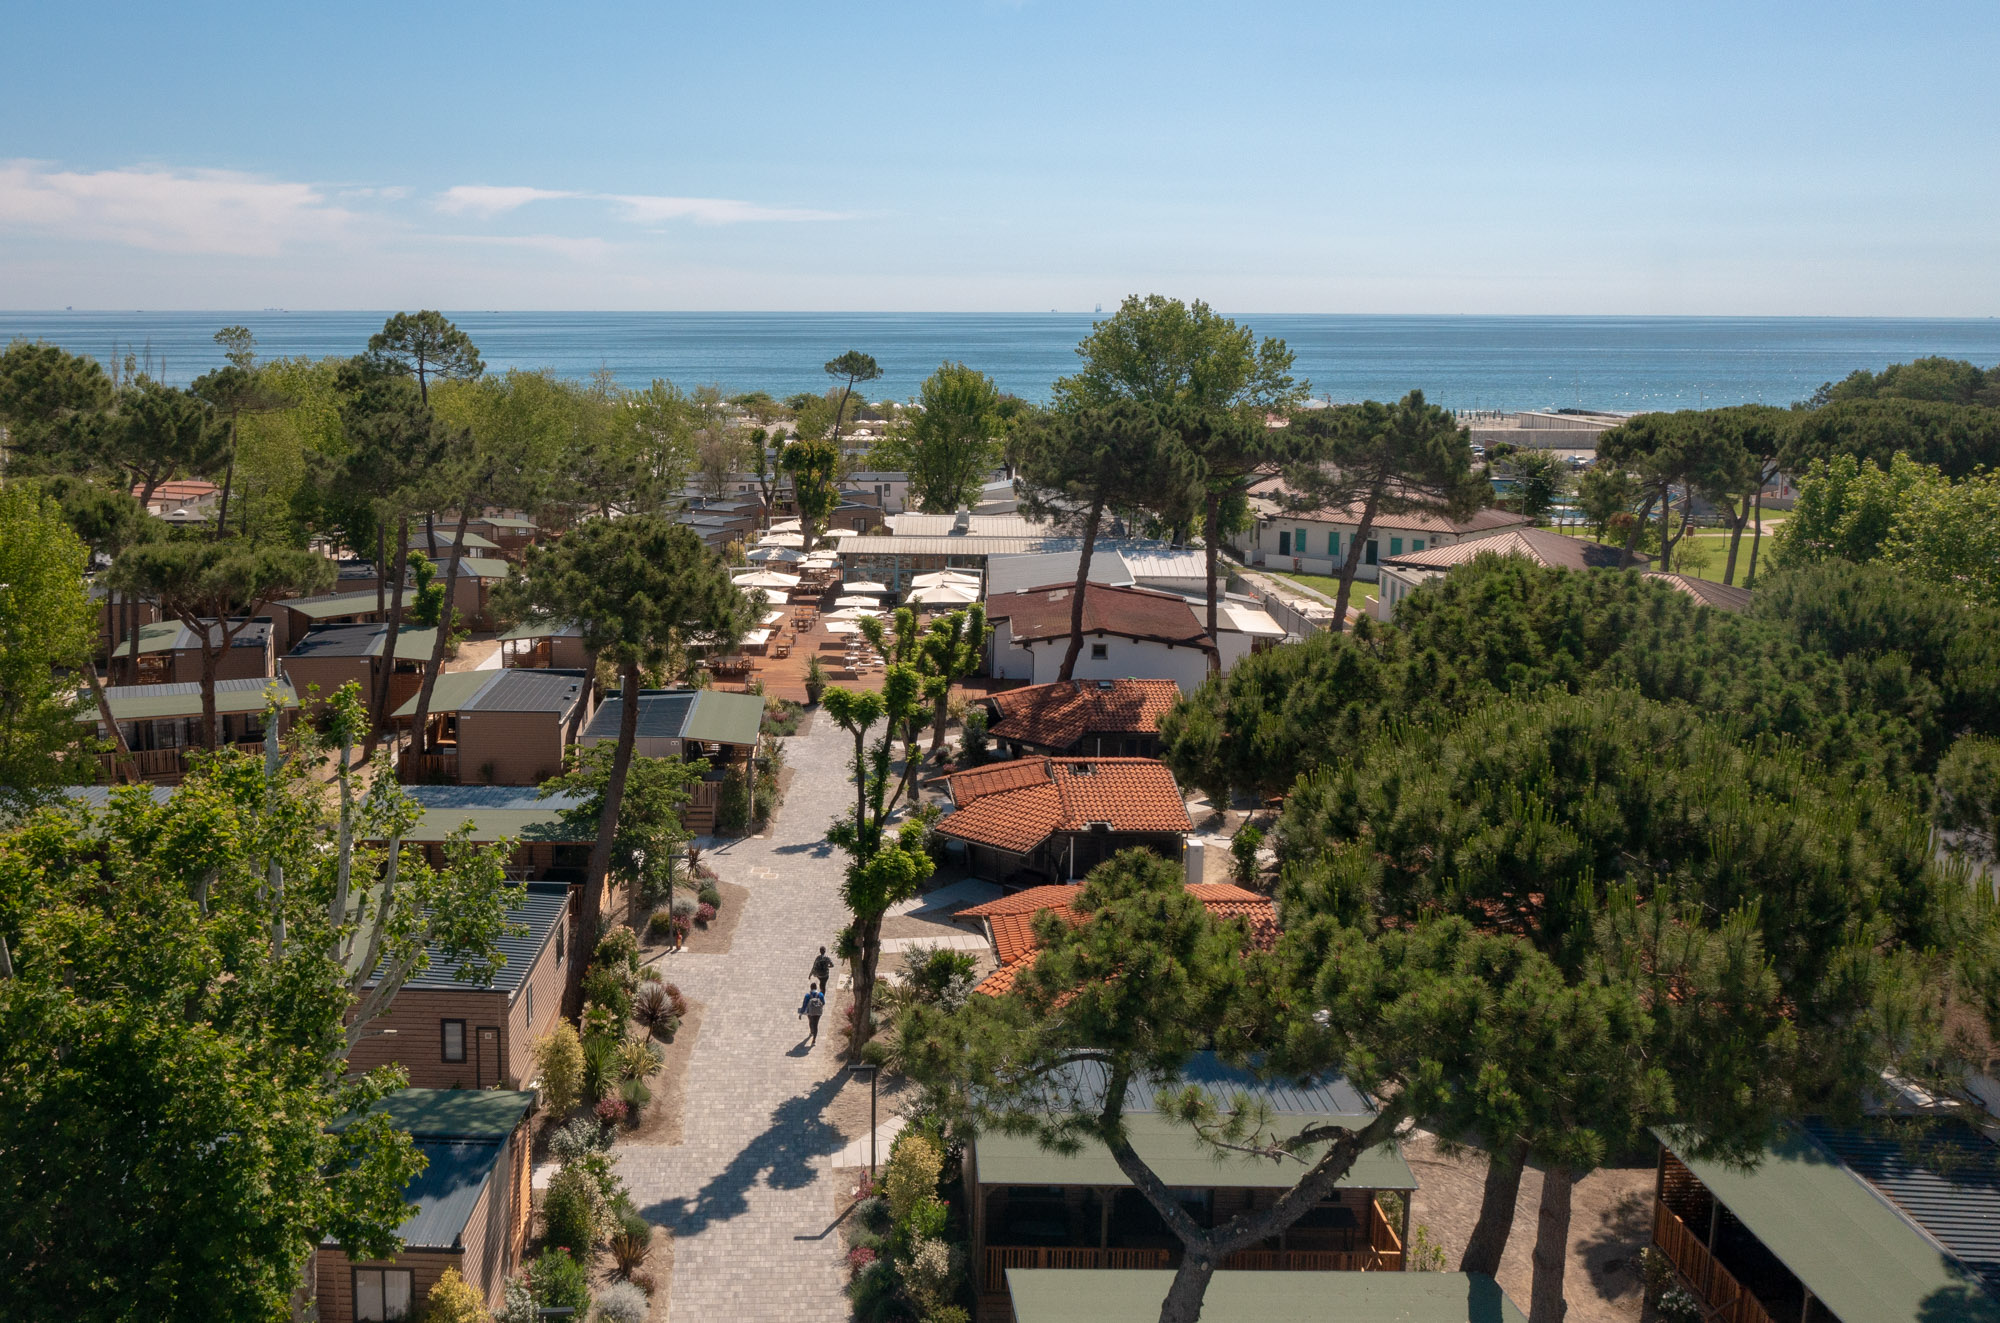 All the information you need about Pineta Beach Village